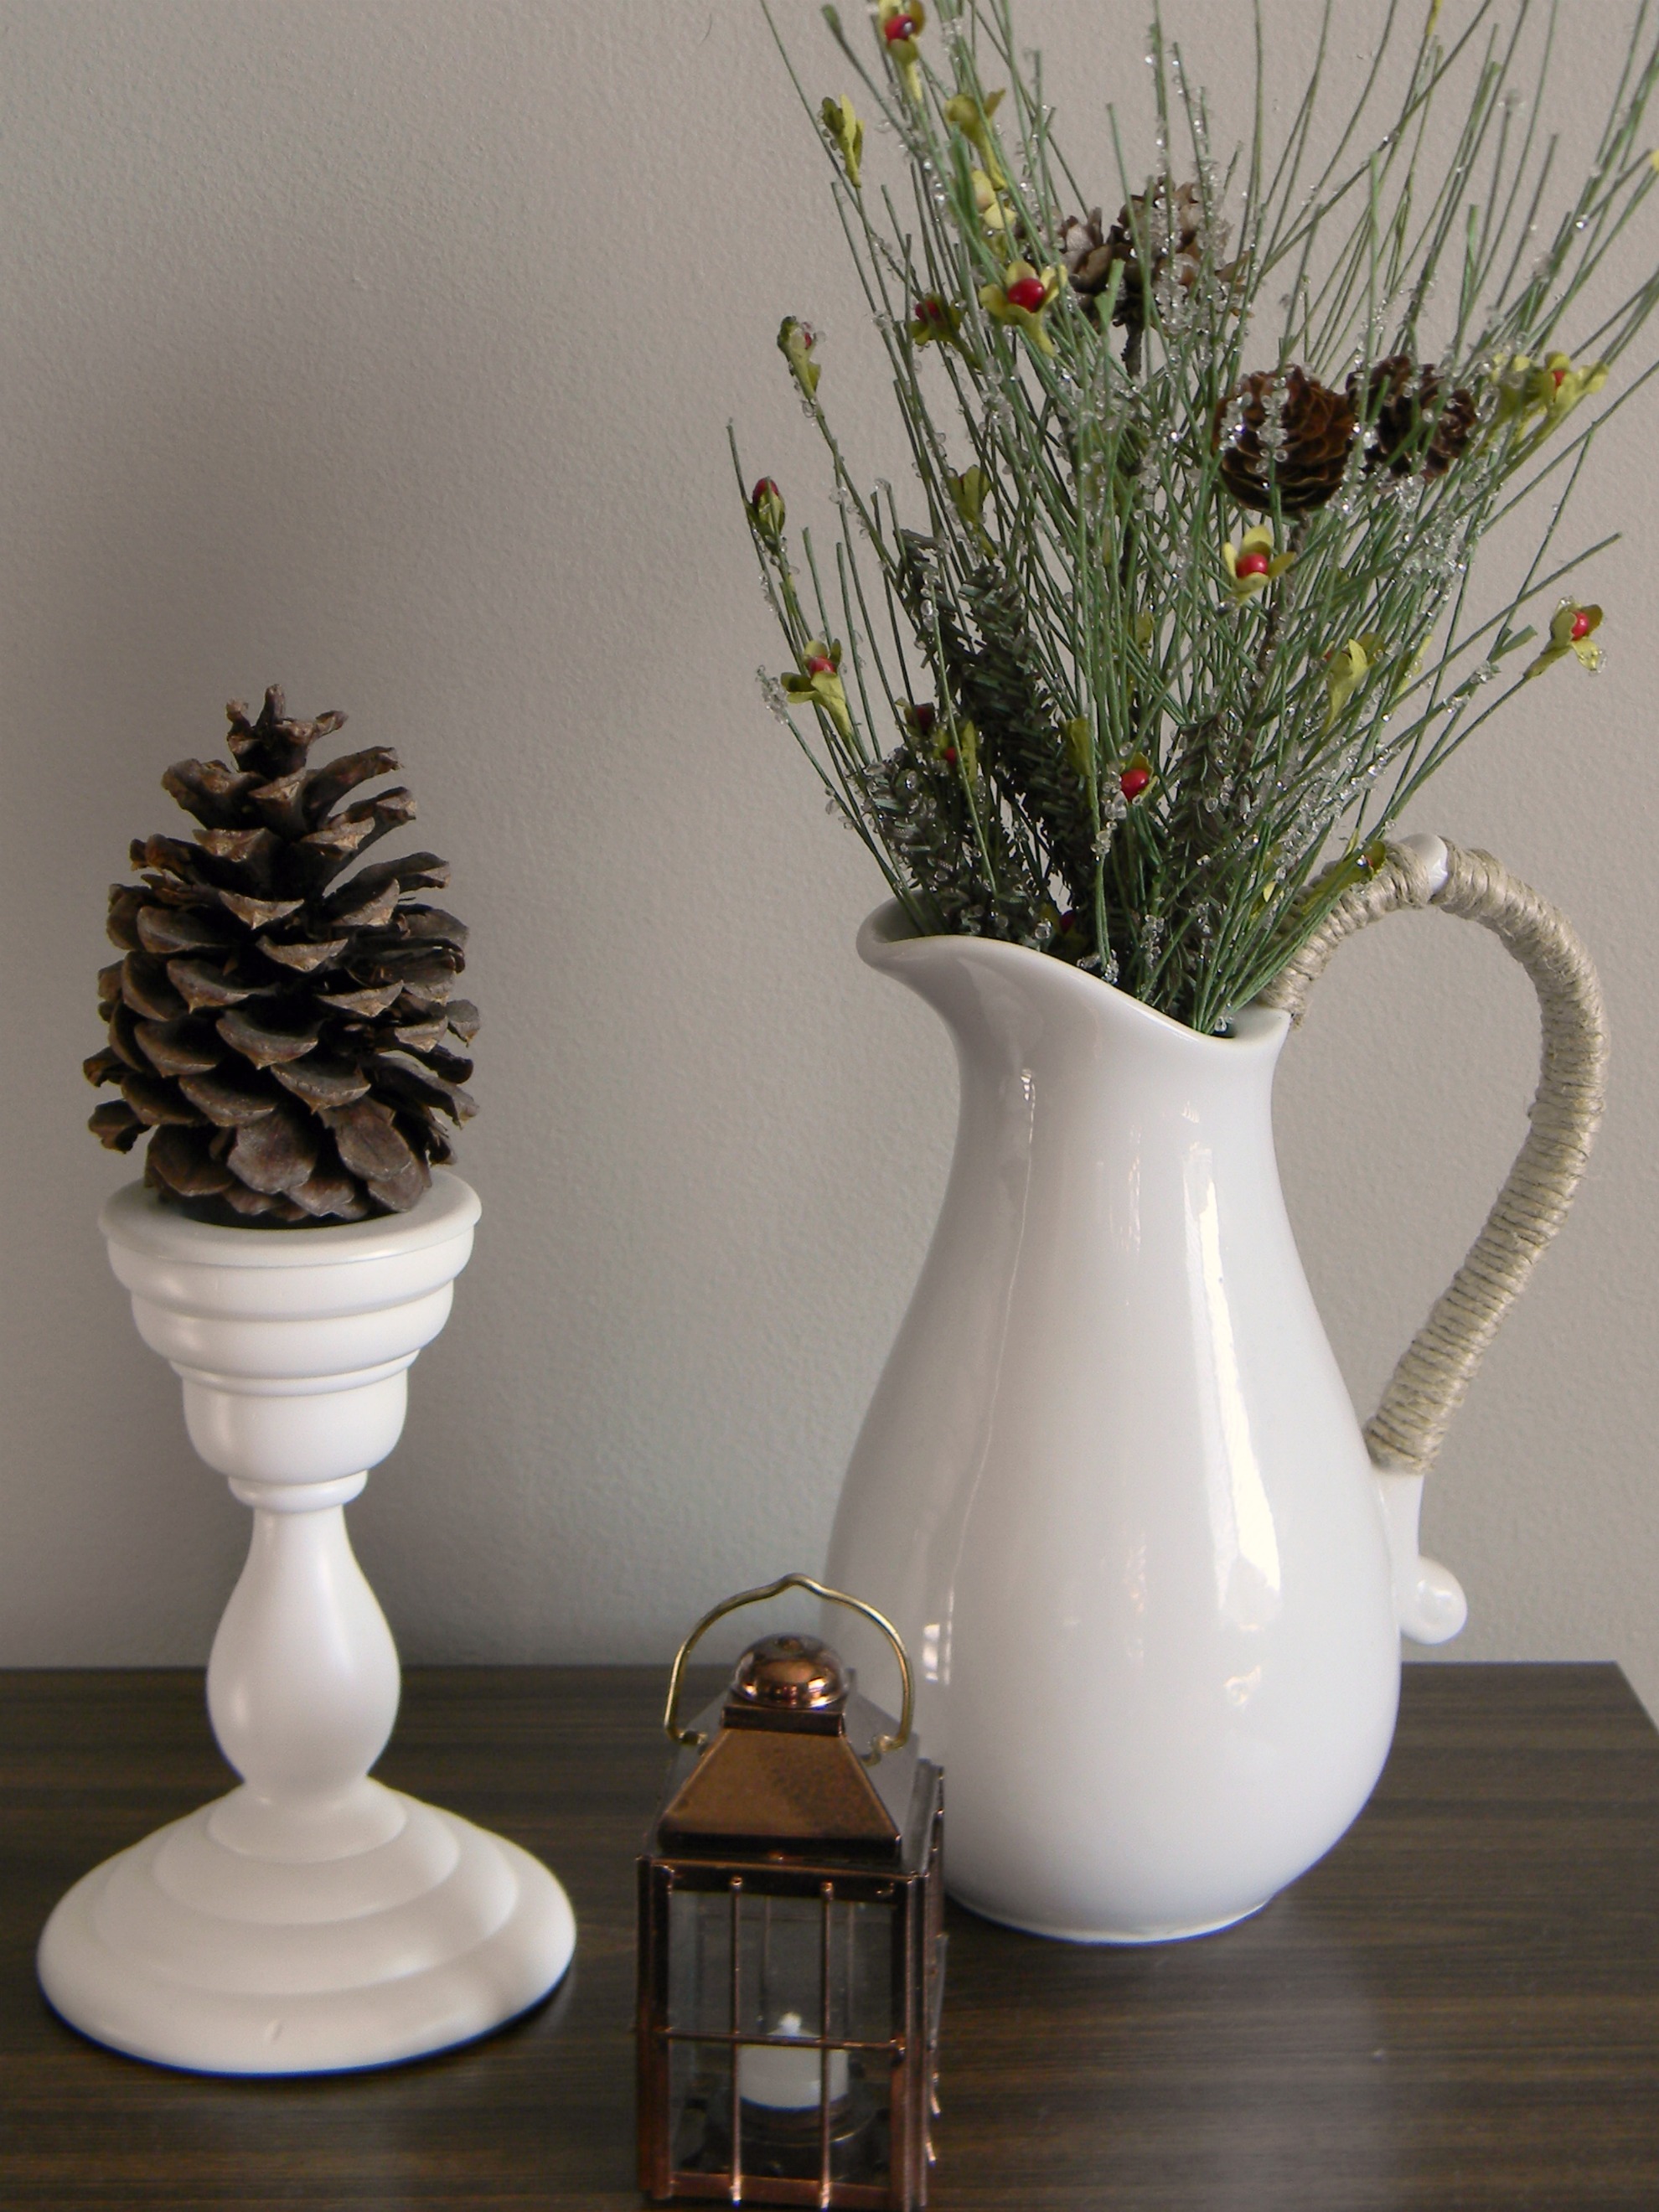 Natural/Outdoorsy/Woodsy Christmas Decor - Organize and Decorate